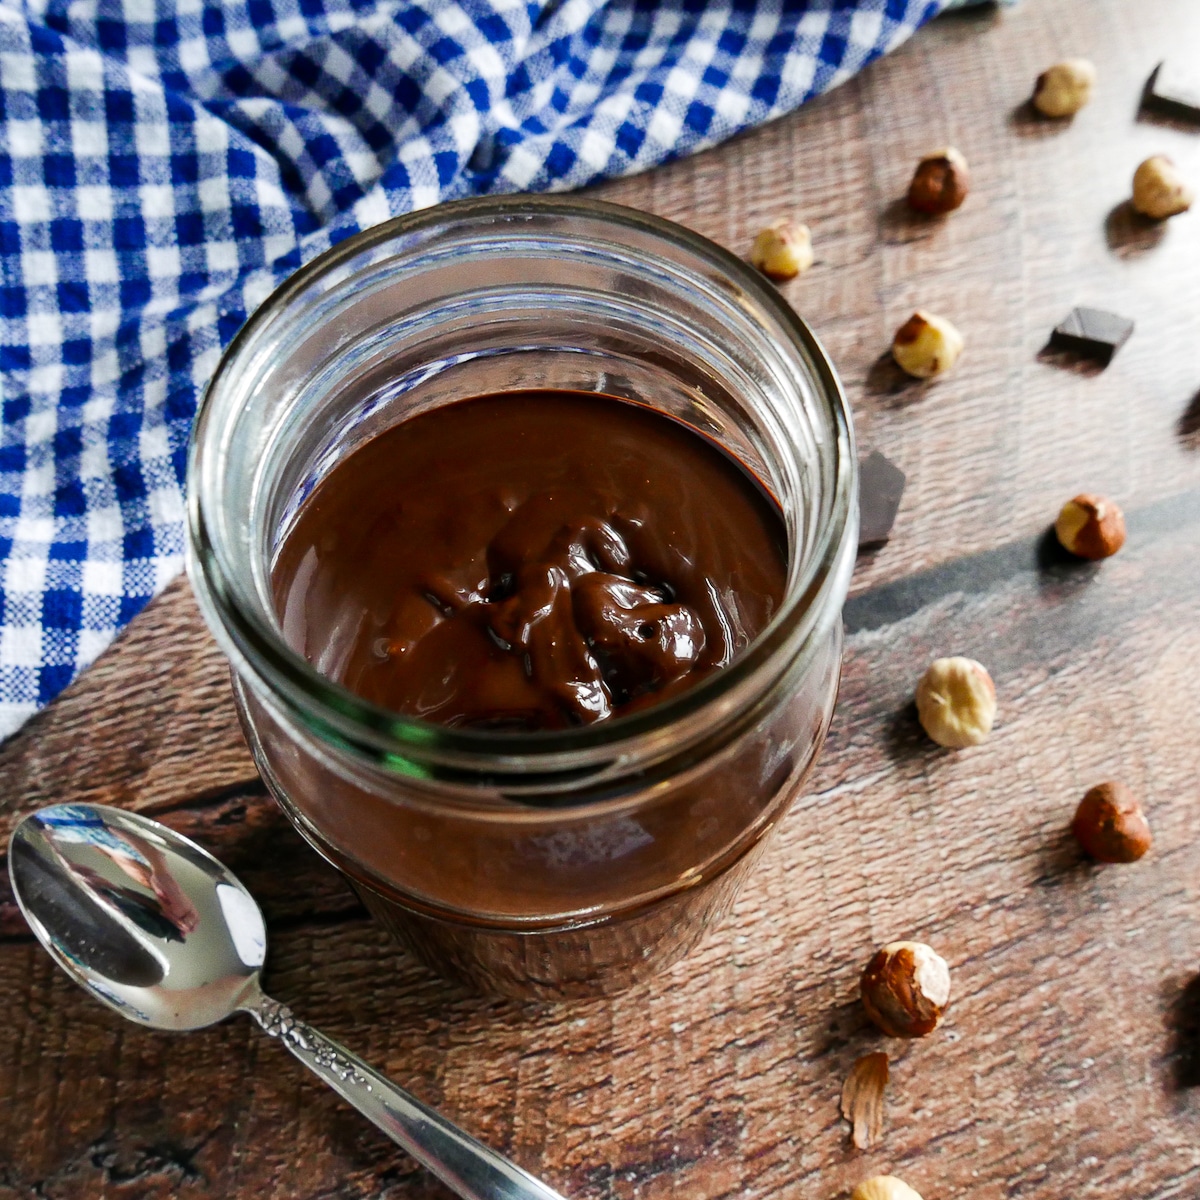 Dairy free nutella in a glass jar with a spoon and hazelnuts scattered around.